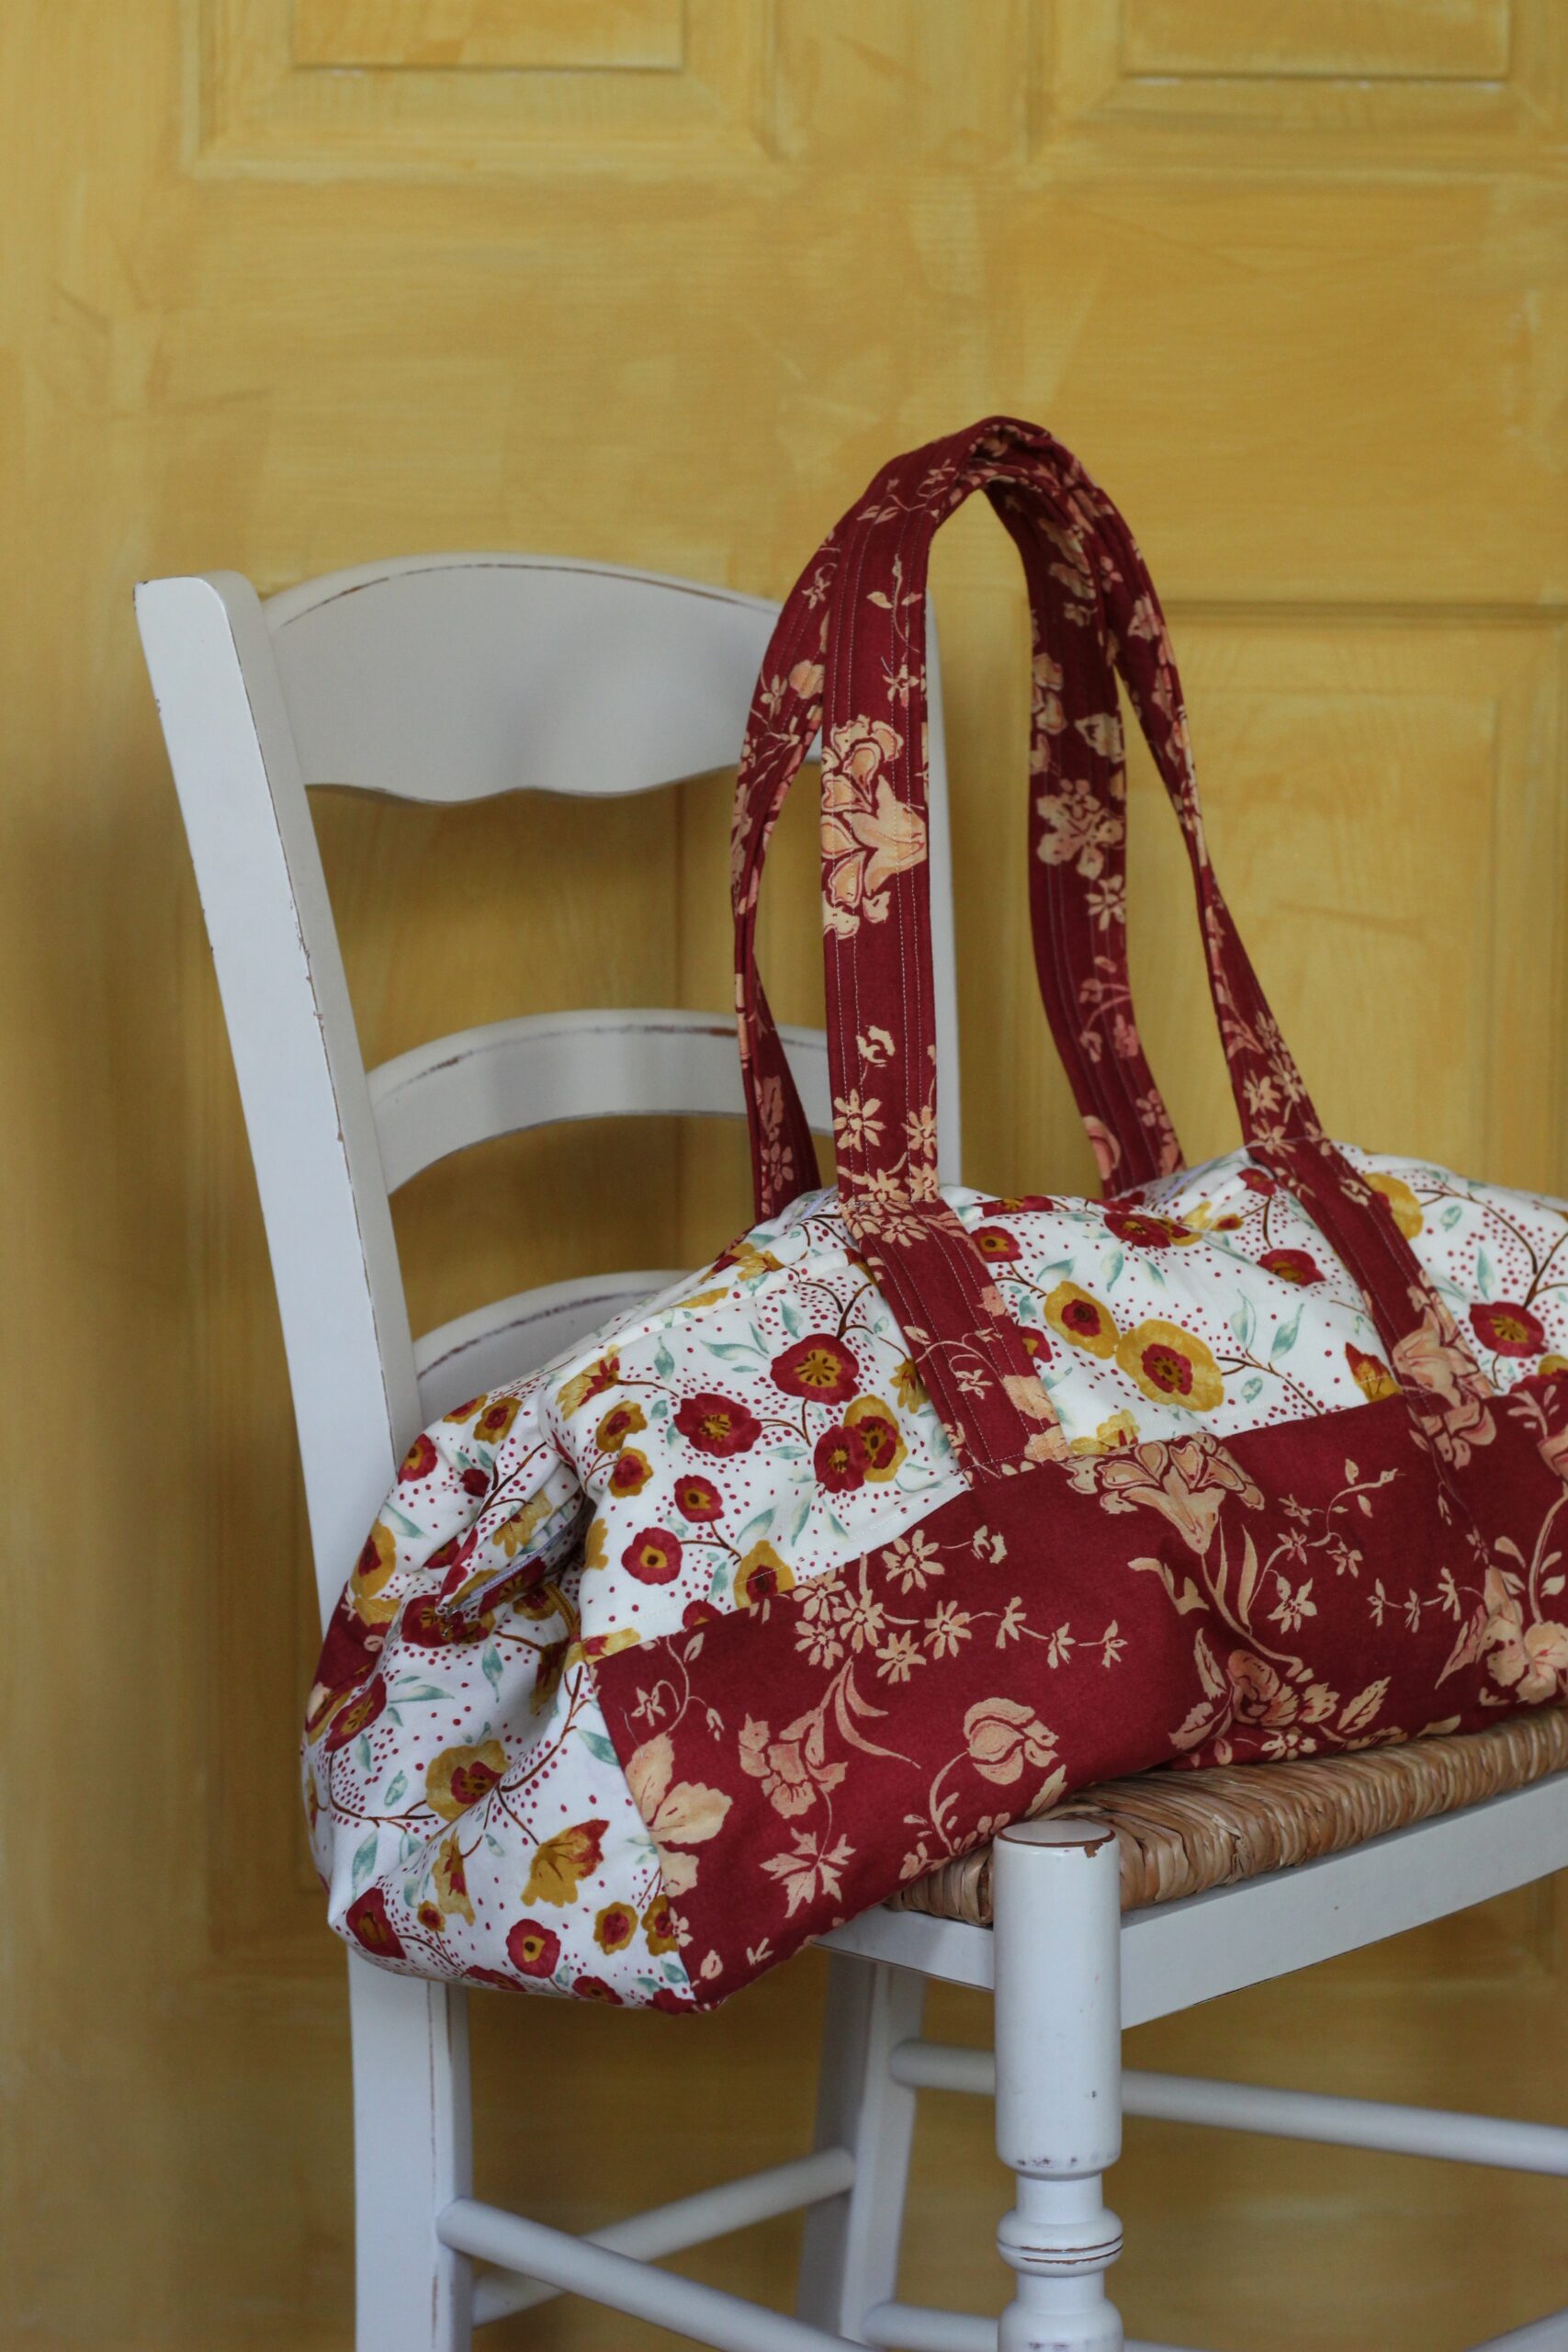 Design Your Own Dynamic Duffel Bag Sewing Pattern with Sewspire